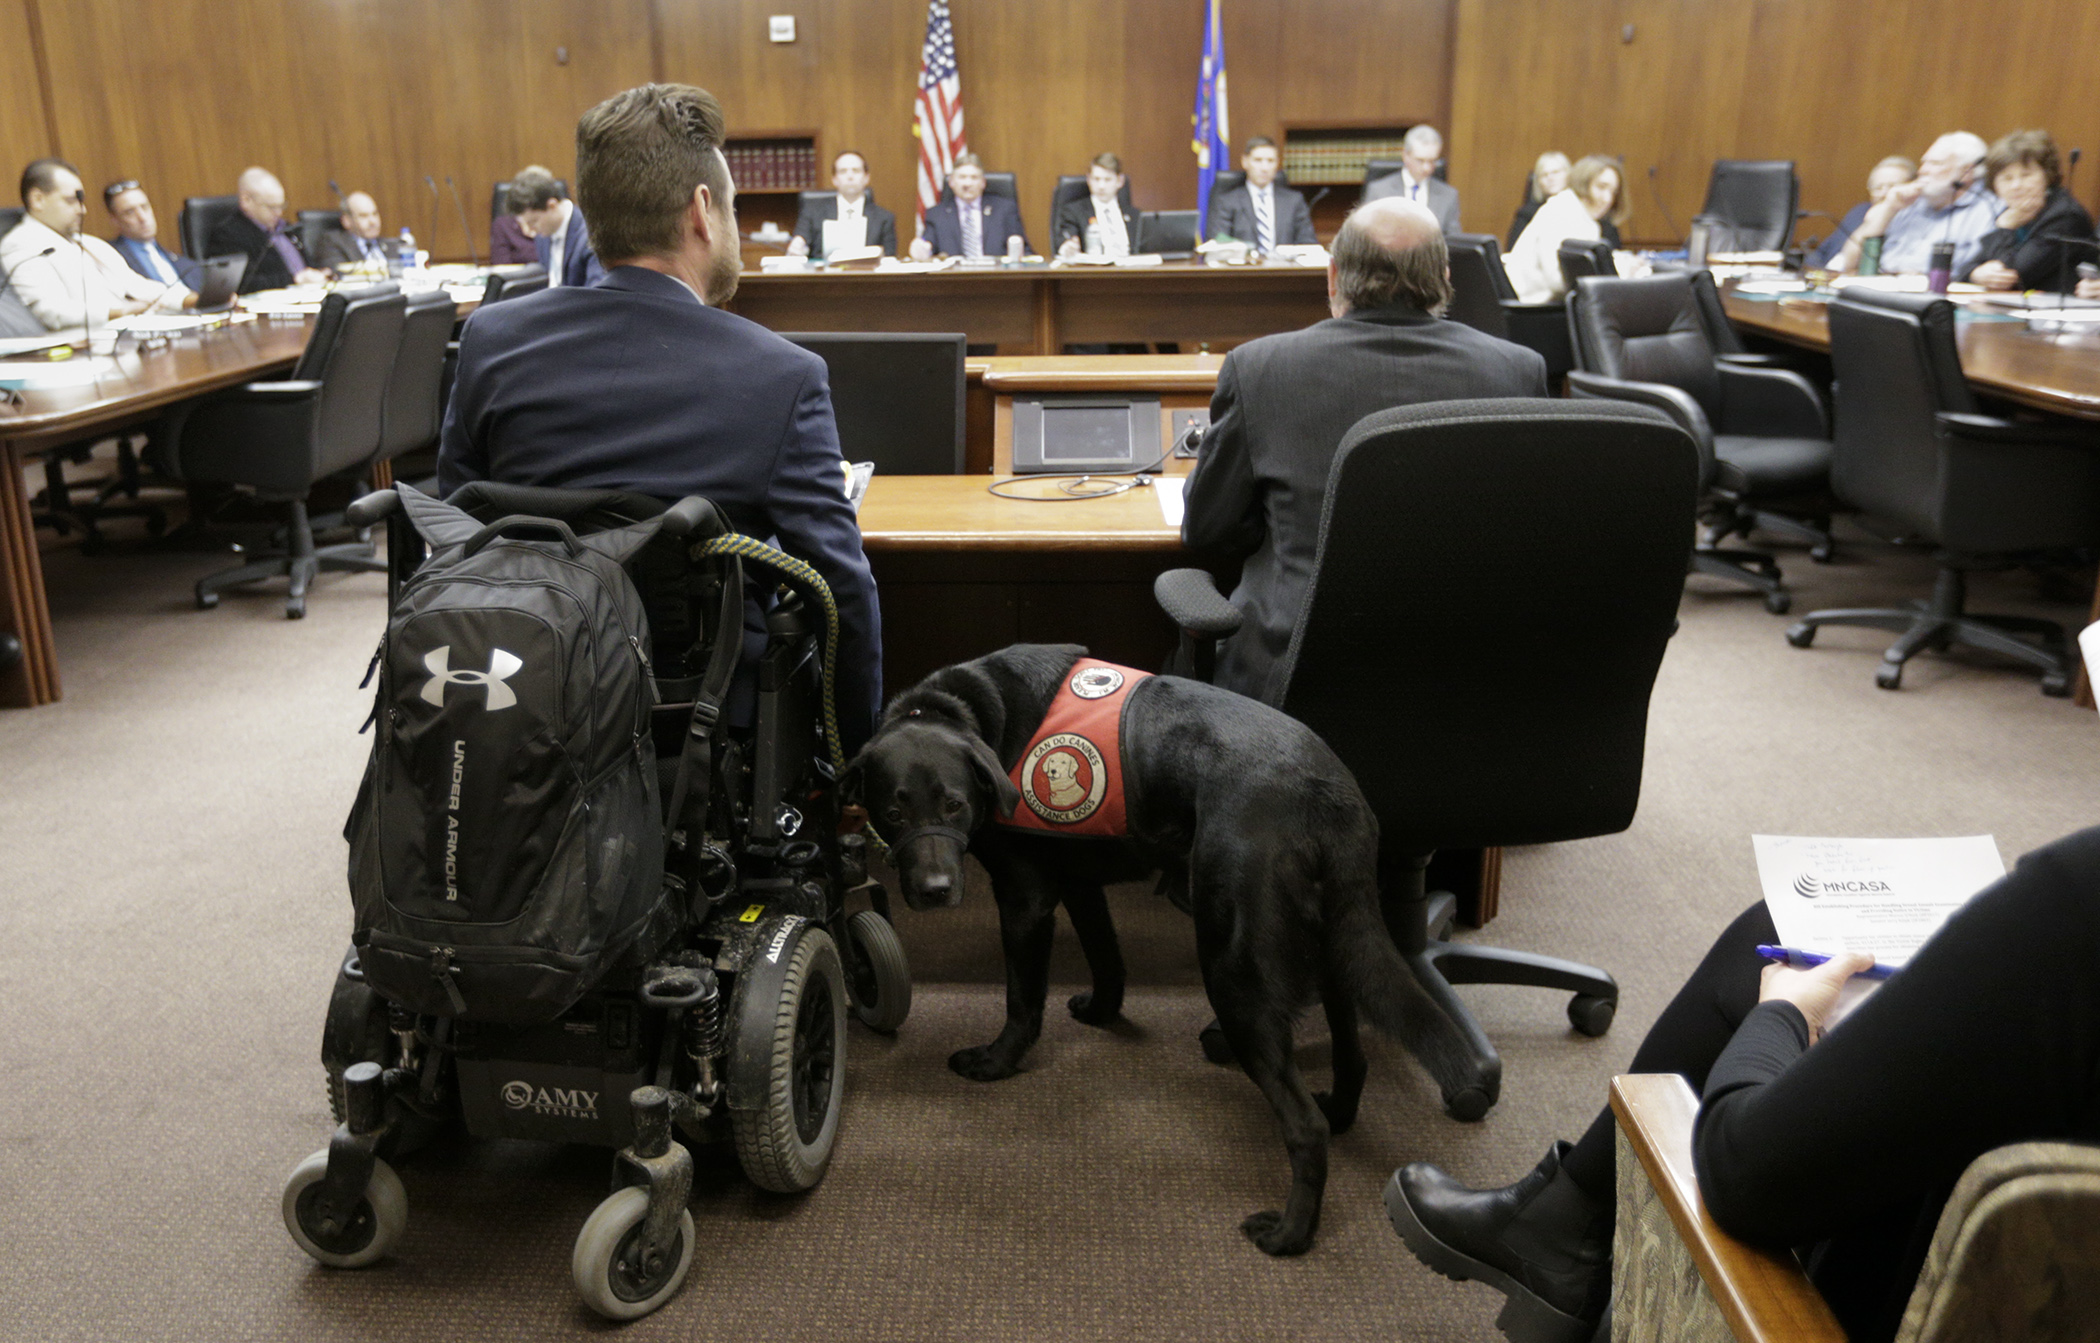 With his service dog, Porter, alongside, Chad Wilson, staff attorney with the Minnesota Disability Law Center, waits to testify March 7 before the House Public Safety and Security Policy and Finance Committee. Photo by Paul Battaglia